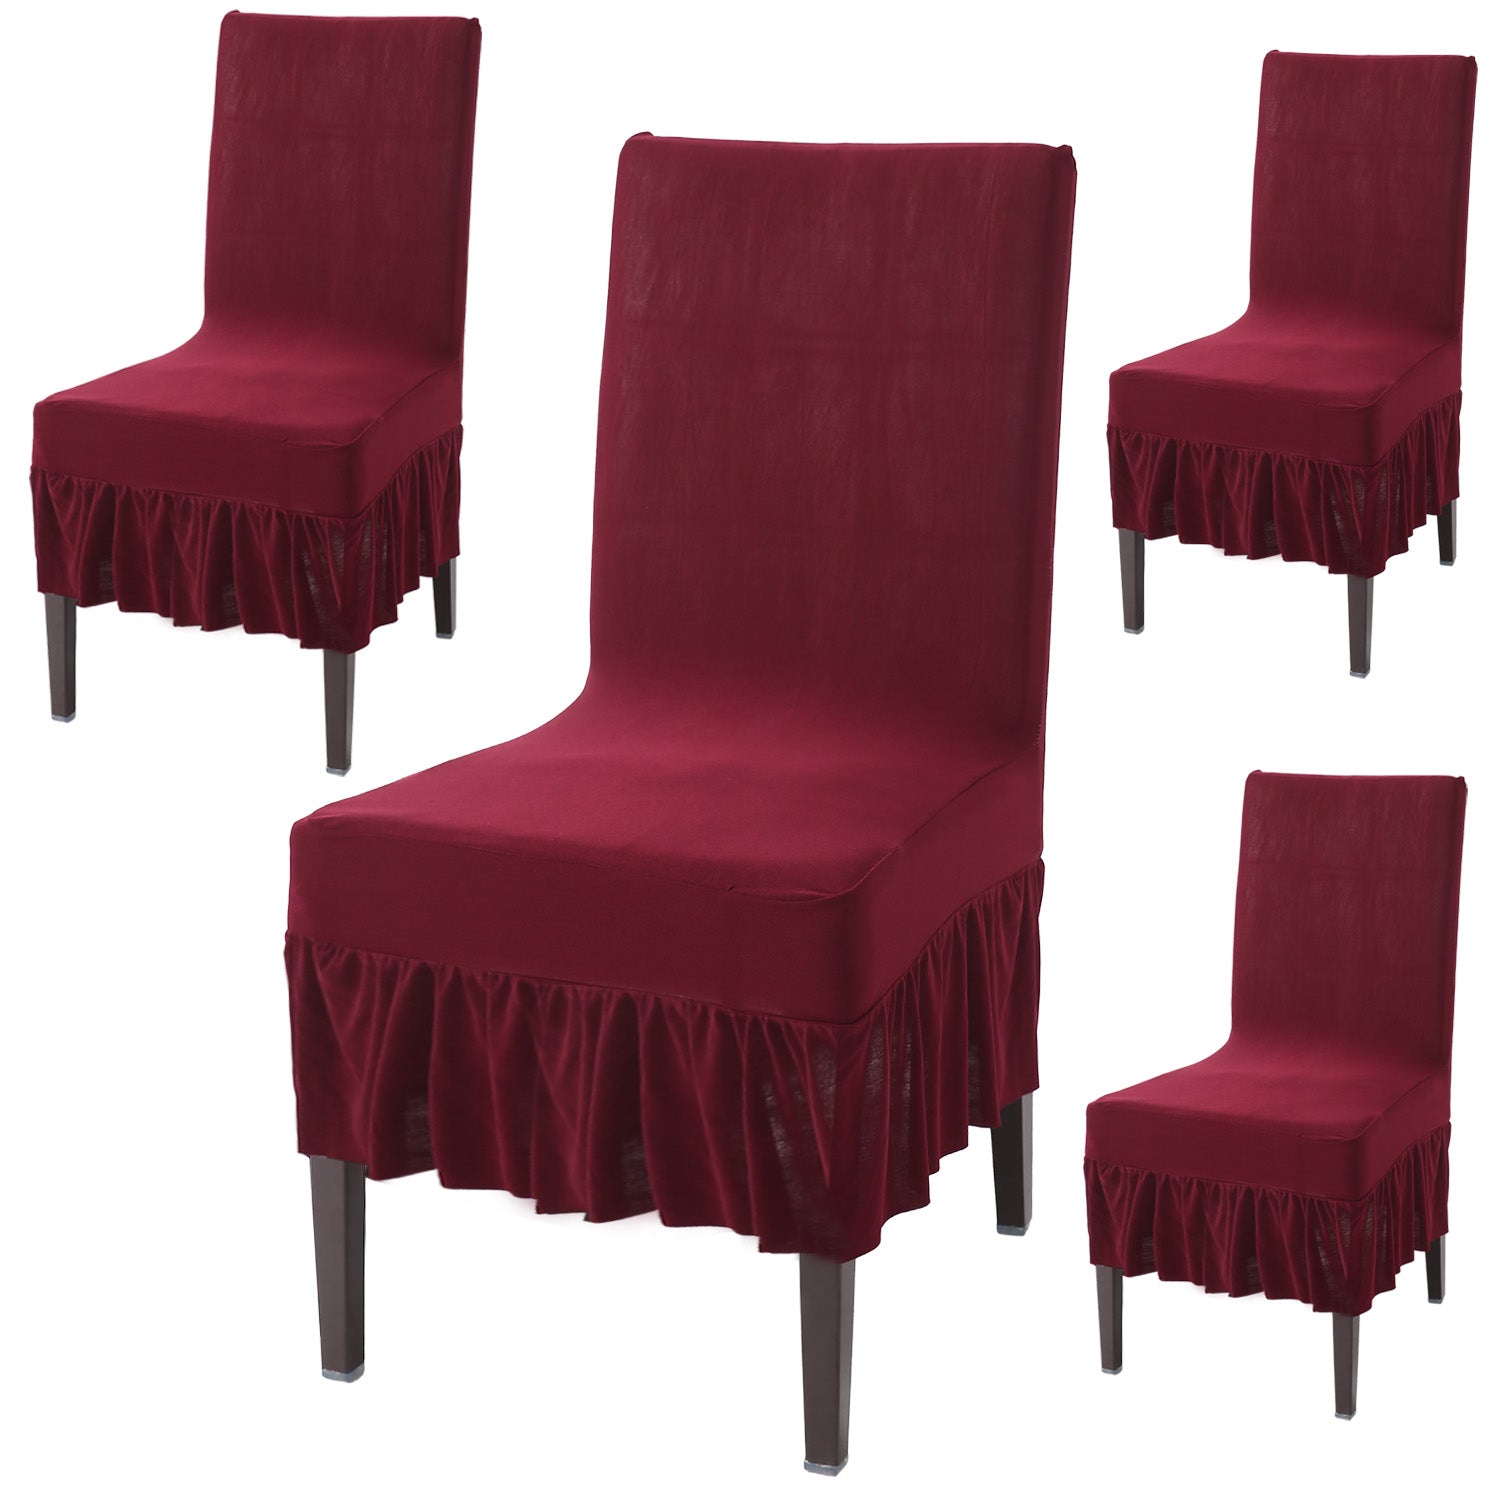 Elastic Stretchable Dining Chair Cover with Frill, Maroon